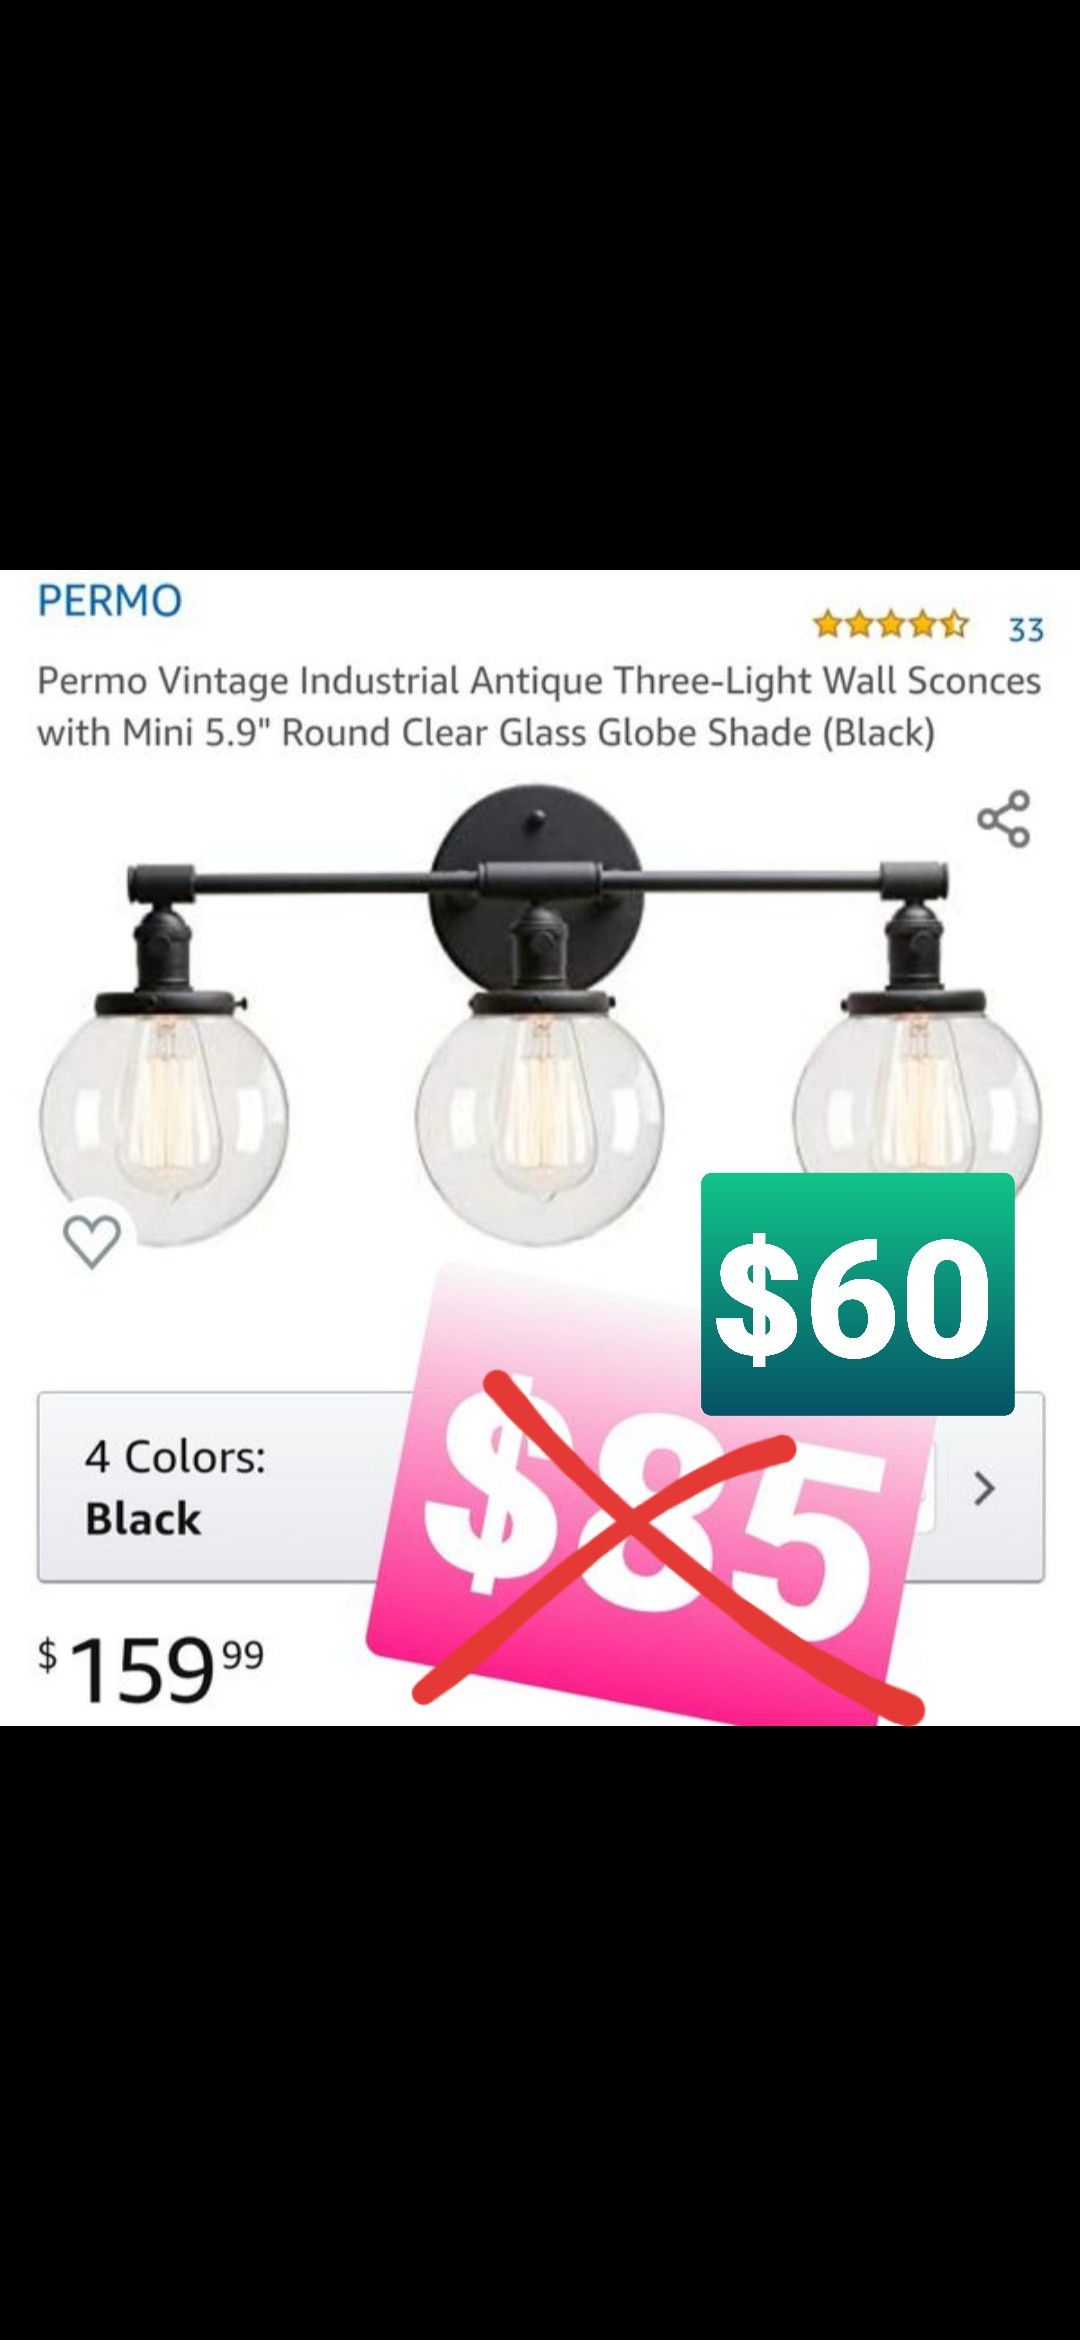 Permo Vintage Industrial Antique Three-Light Wall Sconces with Mini 5.9" Round Clear Glass Globe Shade, Luz de pared